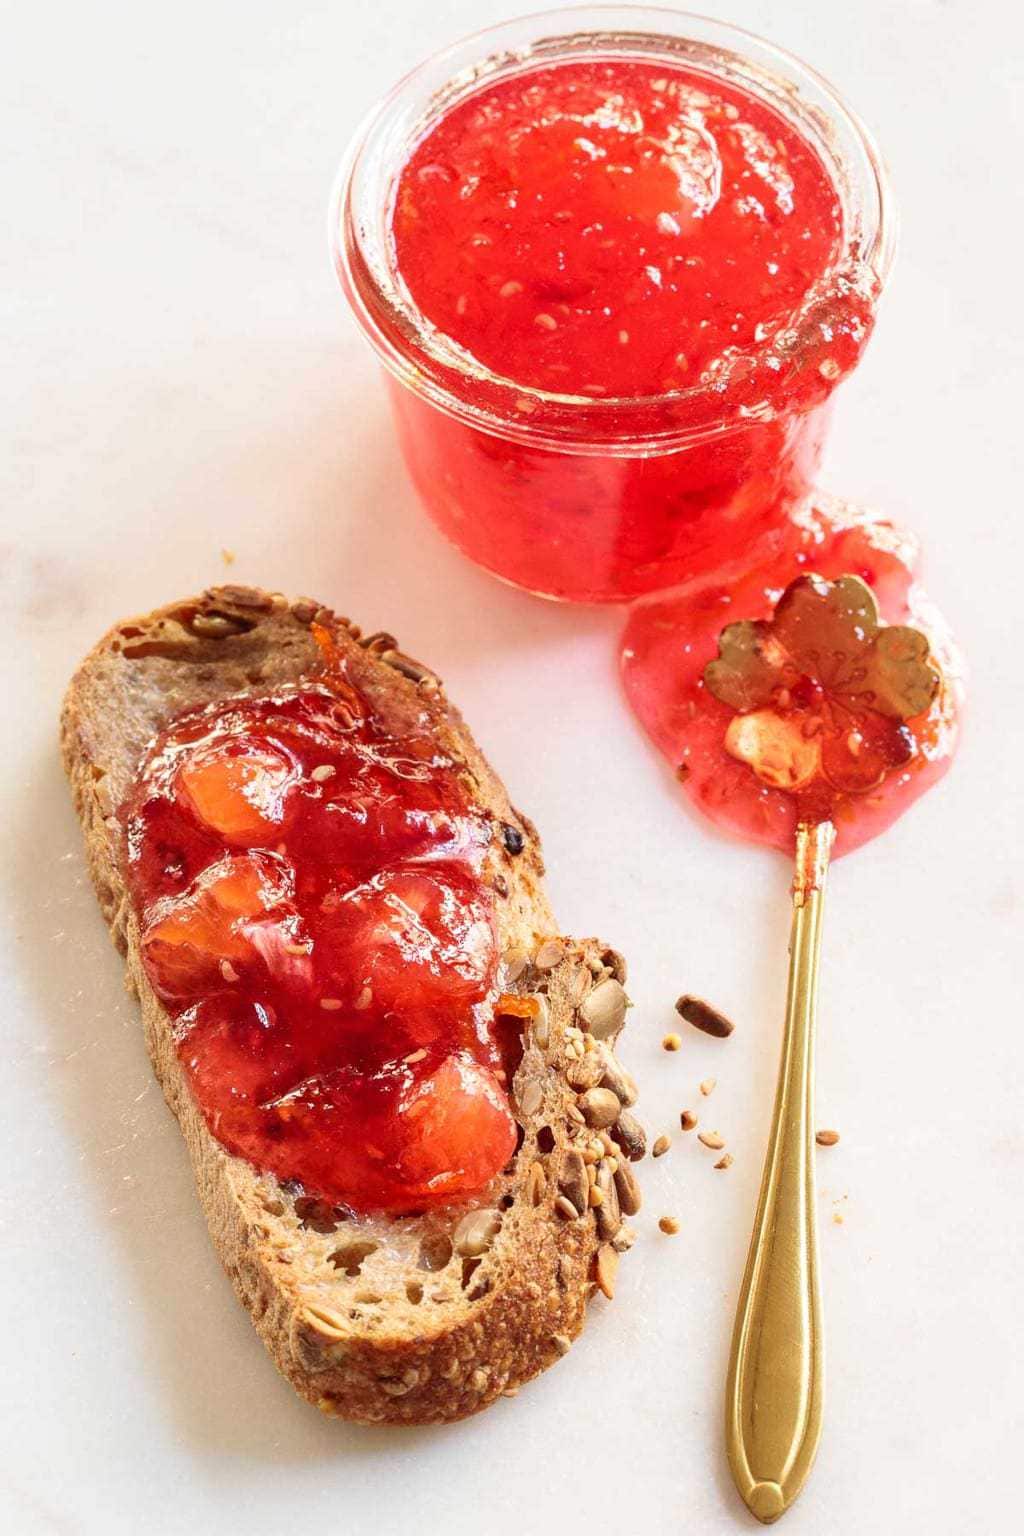 Overhead vertical photo of Raspberry Meyer Lemon Marmalade in a glass jar and also spread on toast with a small gold spoon.